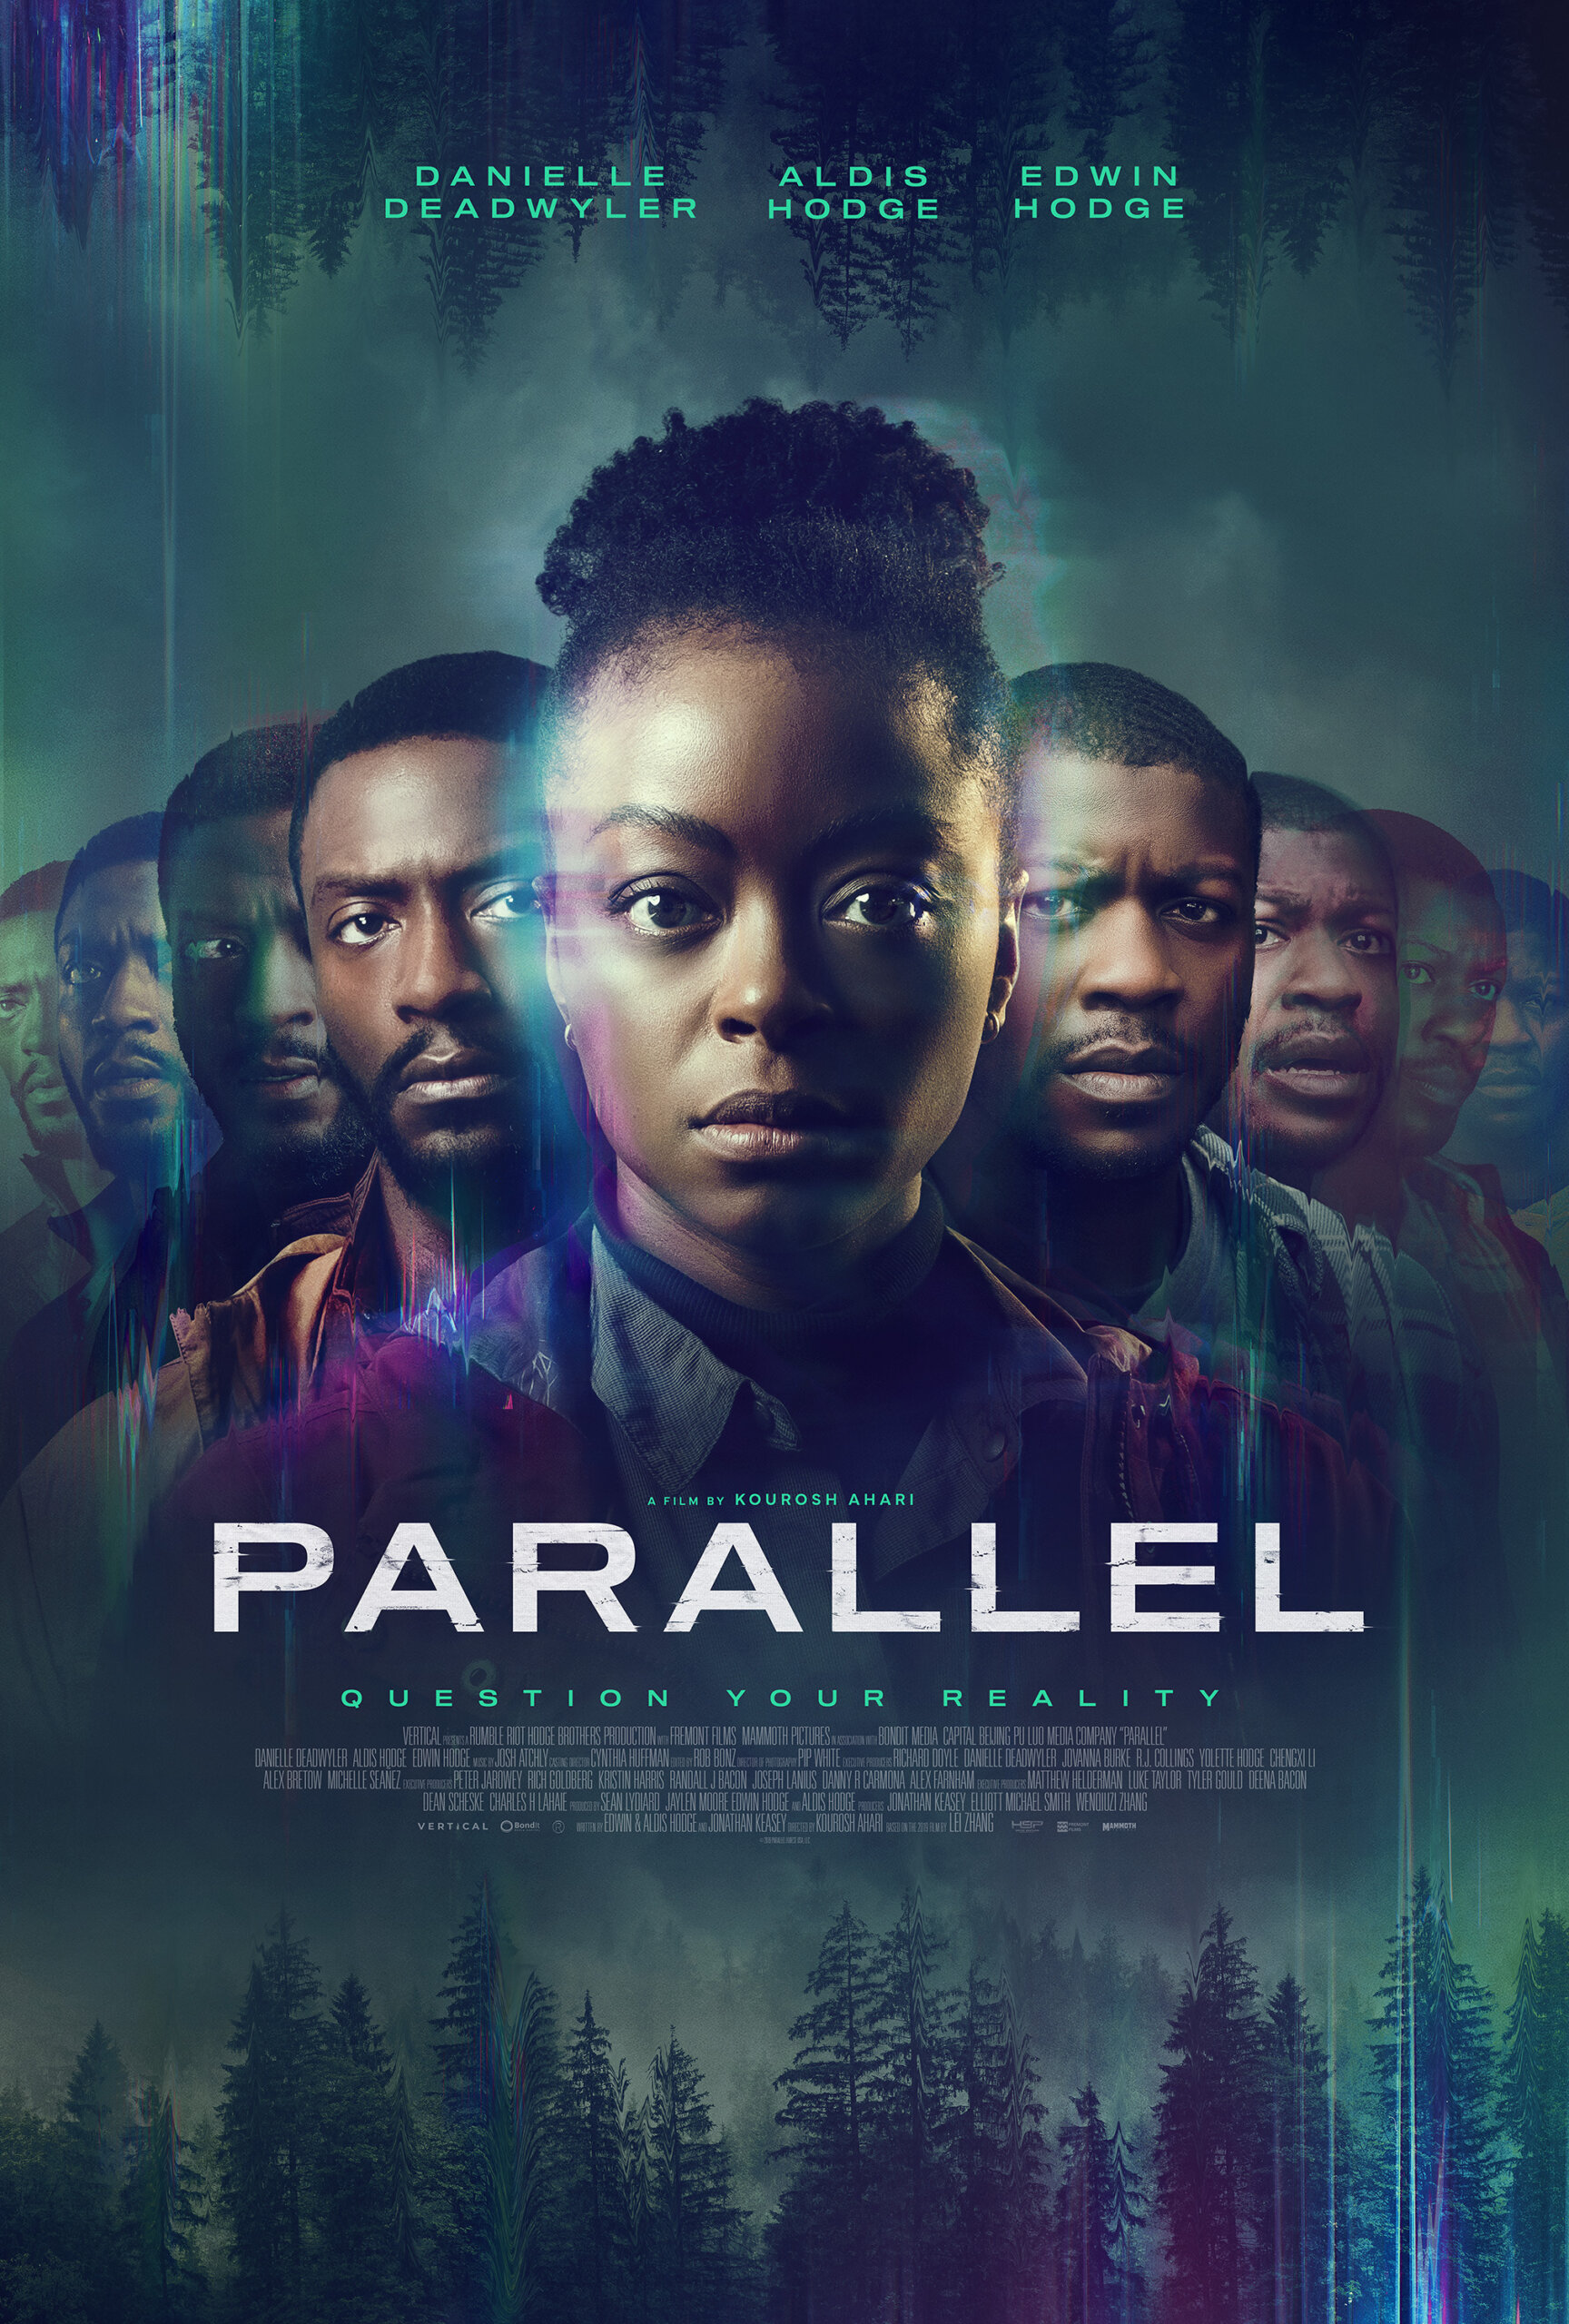 1st Trailer For 'Parallel' Movie